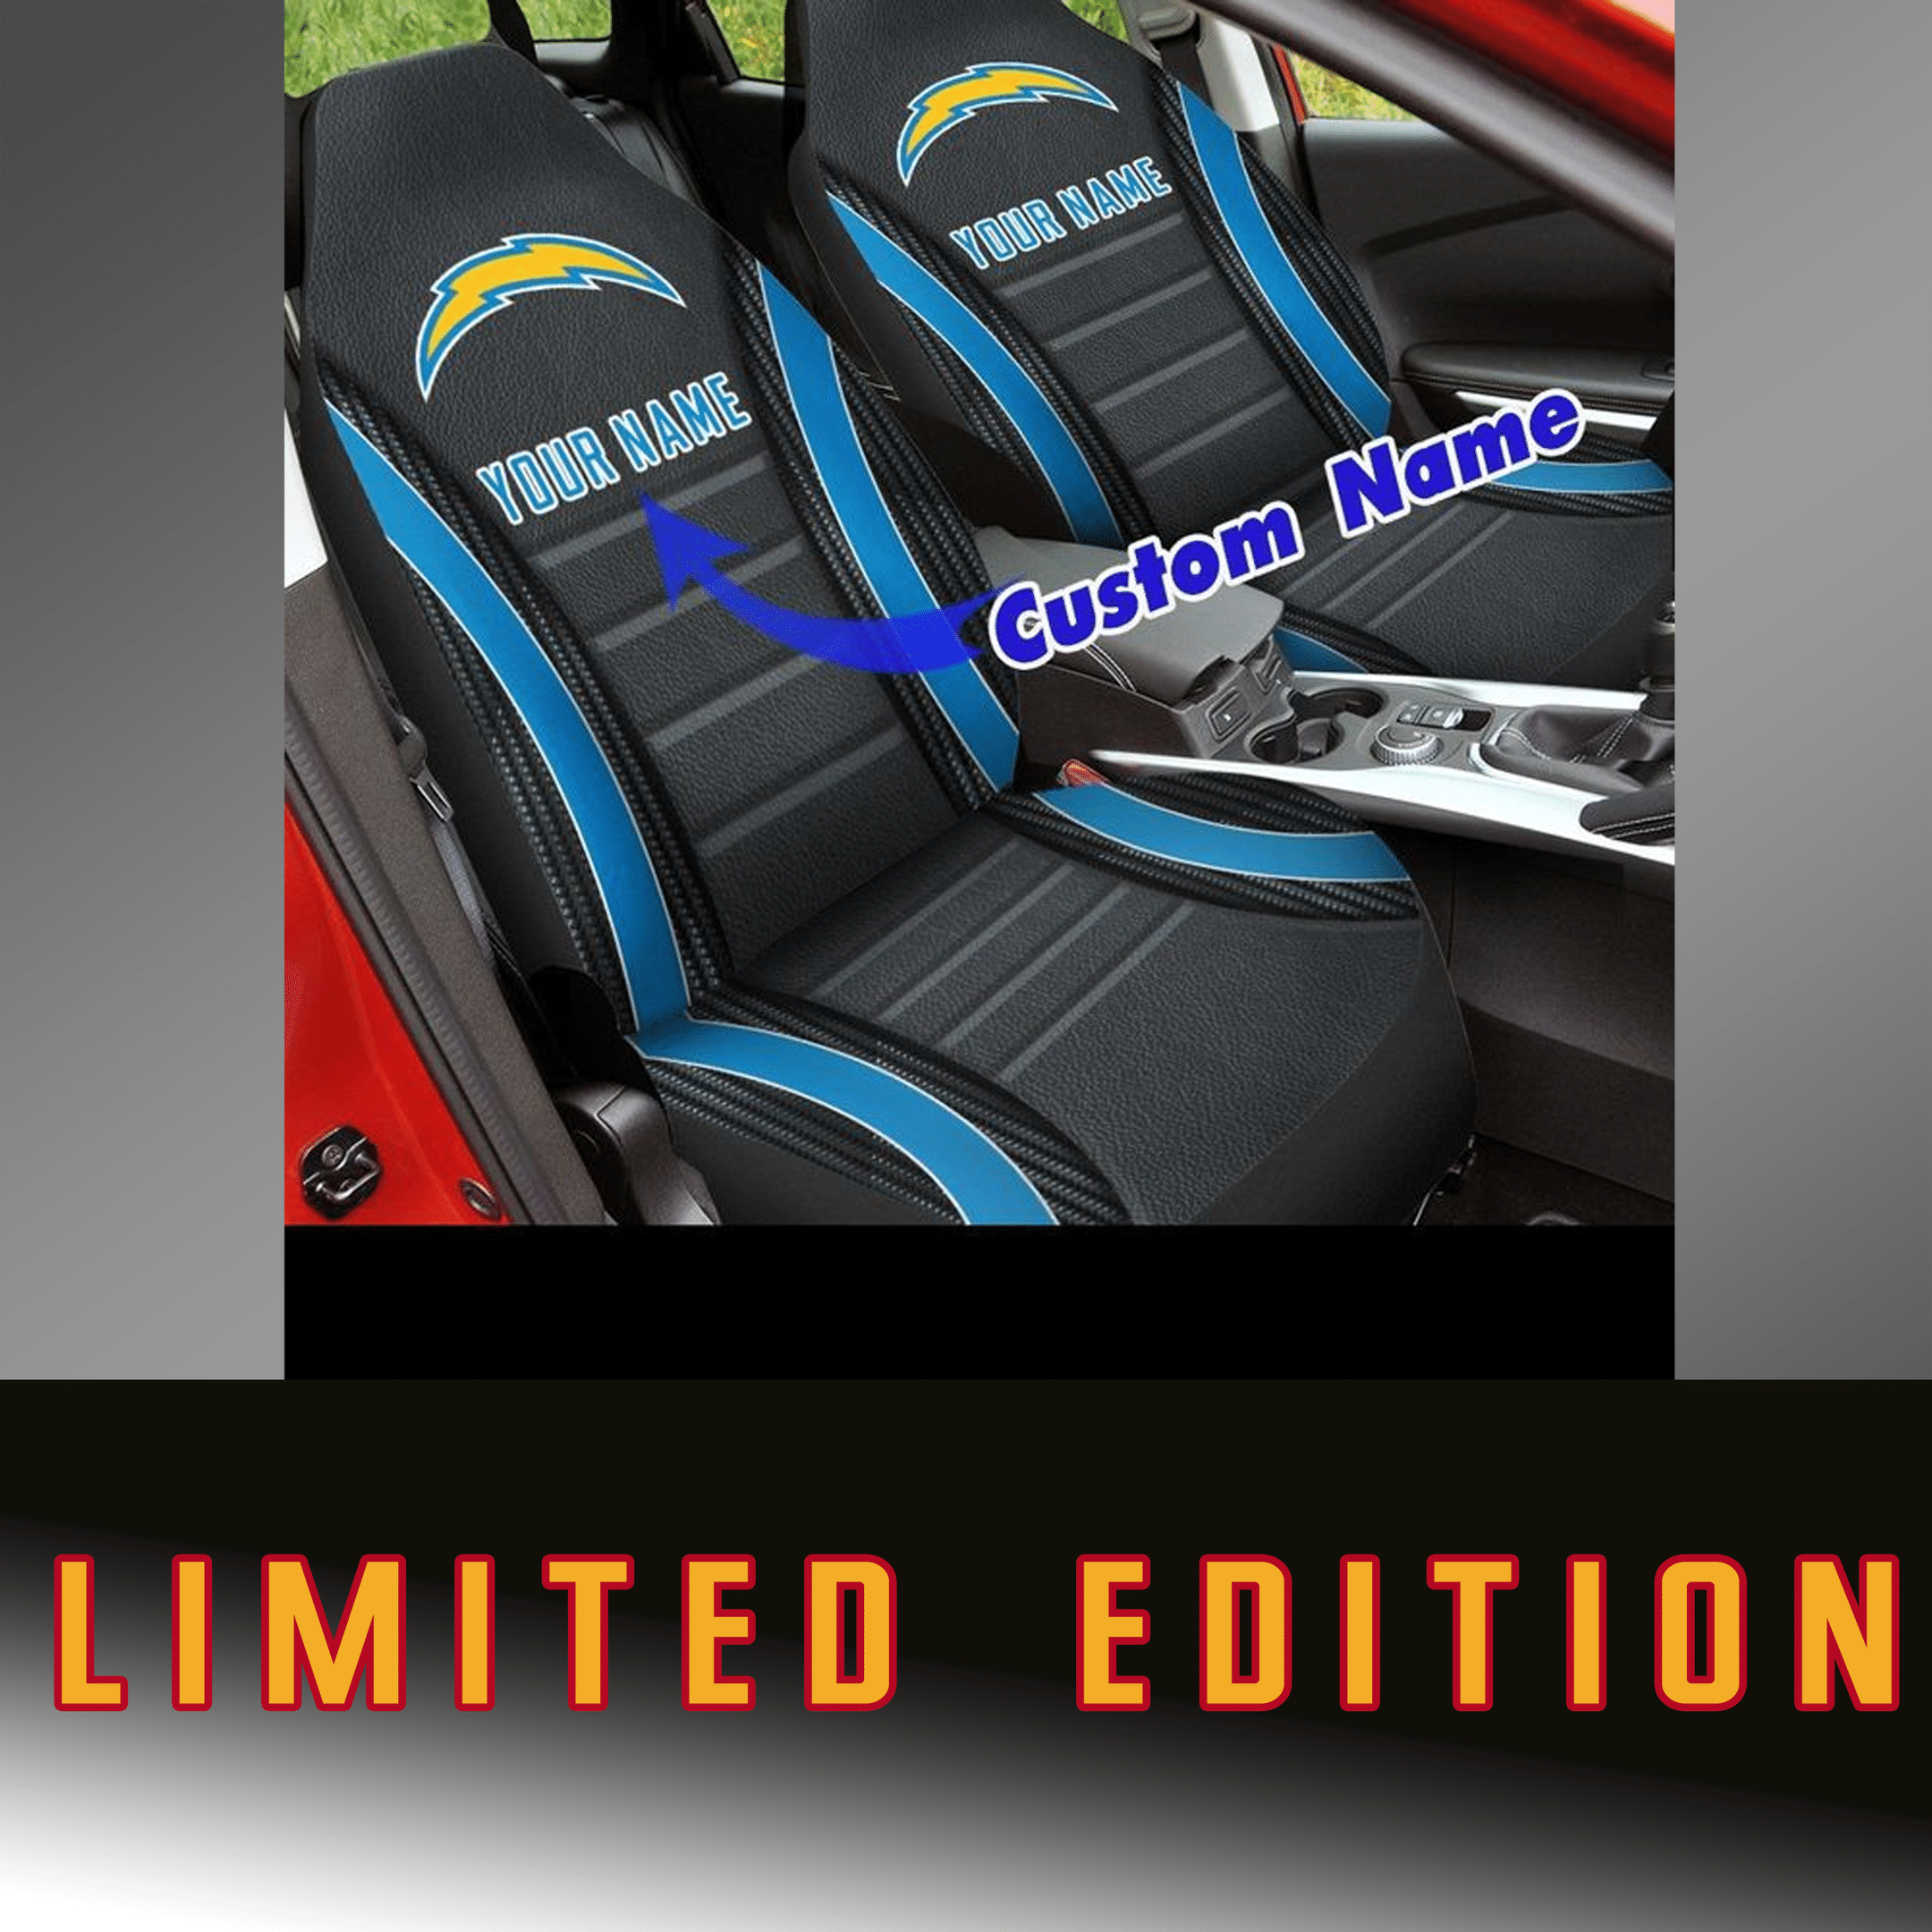 Click now to buy top cool seat cover to protect your car 327